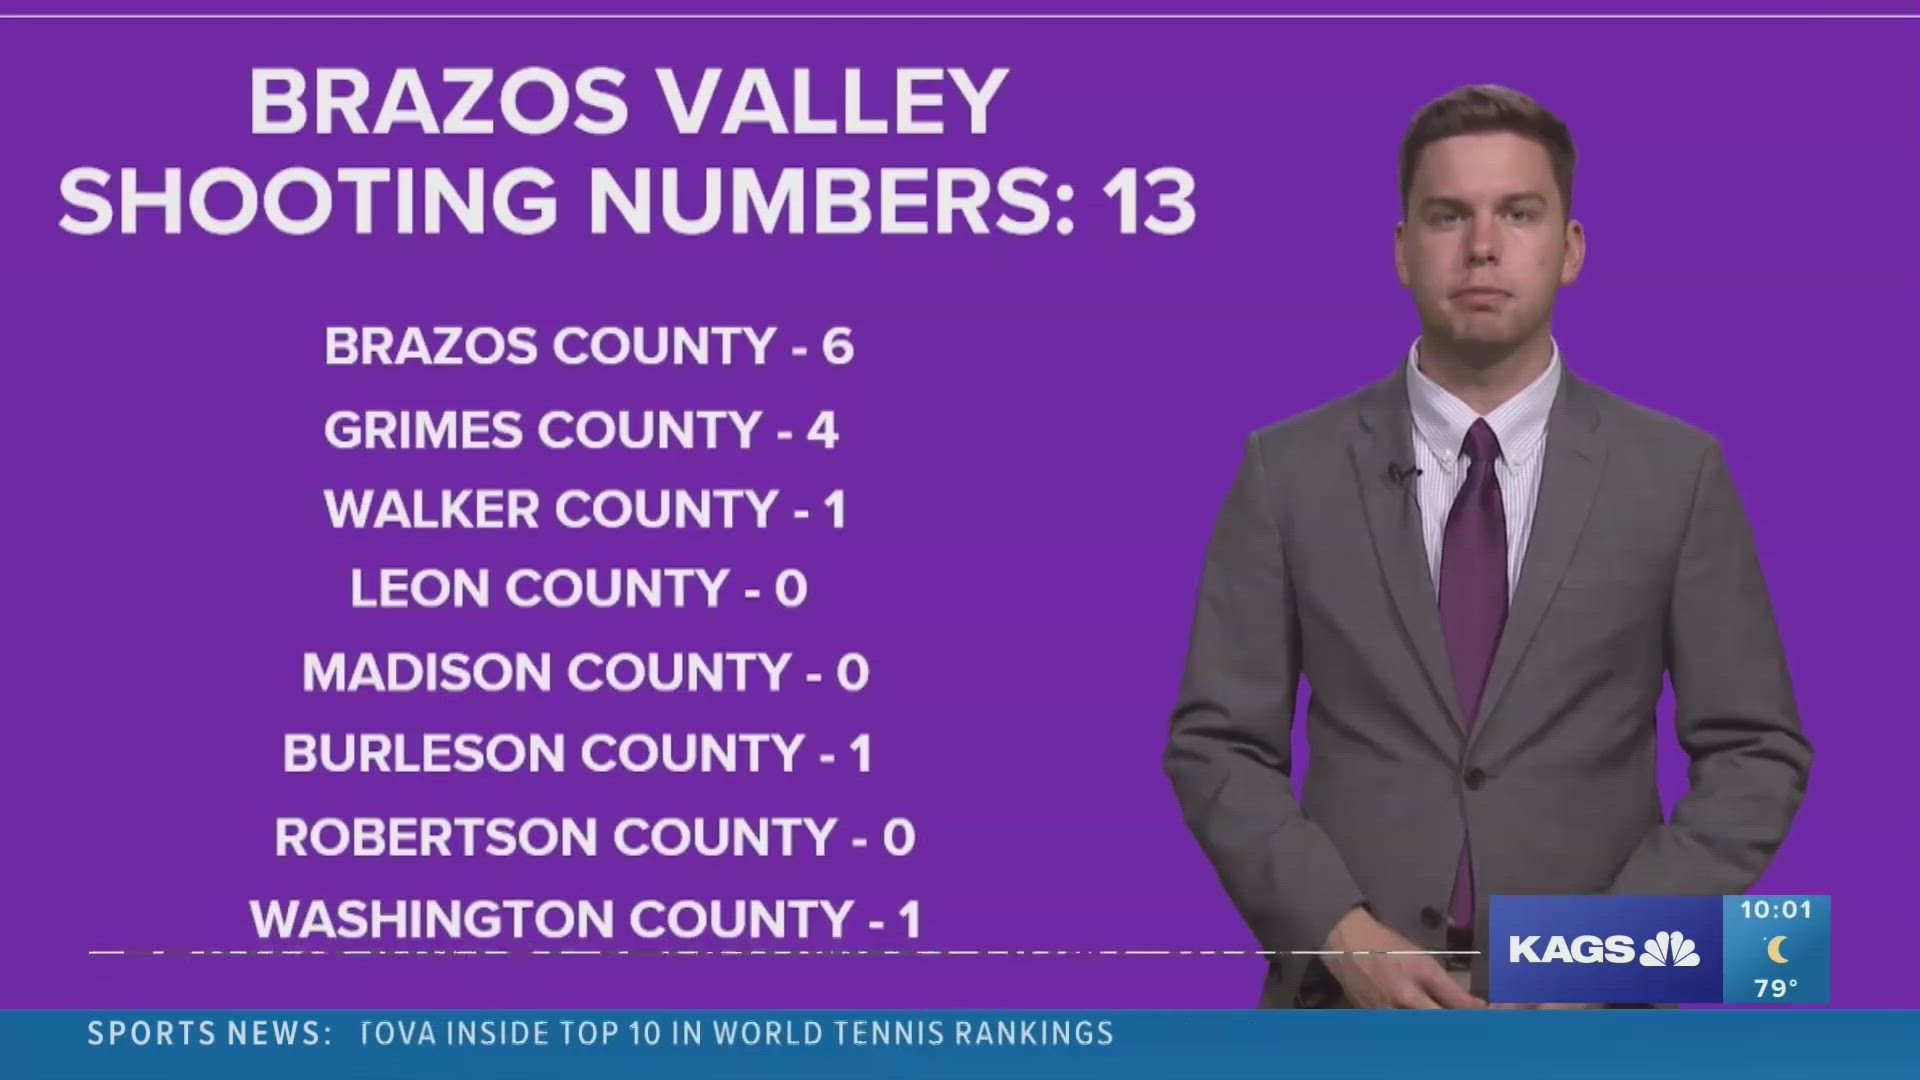 The total number of reported shootings in the Brazos Valley has reached 13. William Johnson breaks down the stories behind what's been happening.